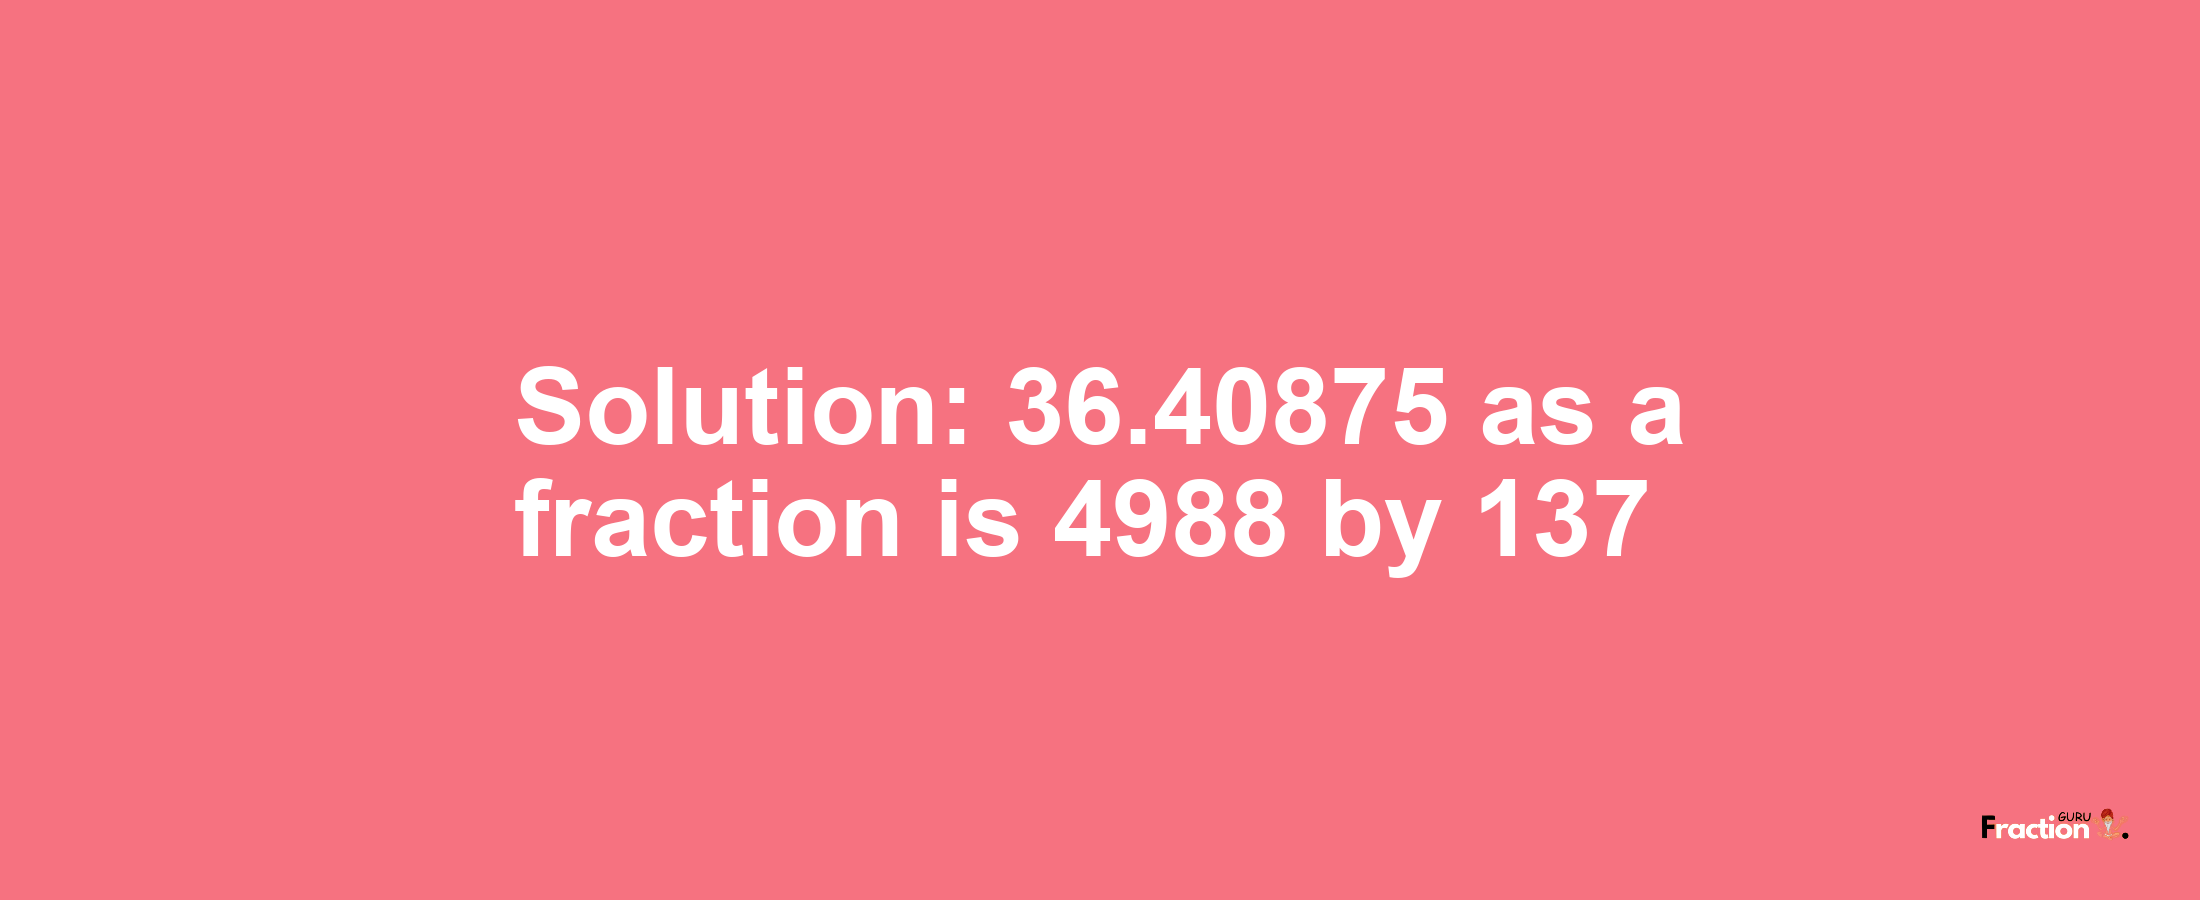 Solution:36.40875 as a fraction is 4988/137